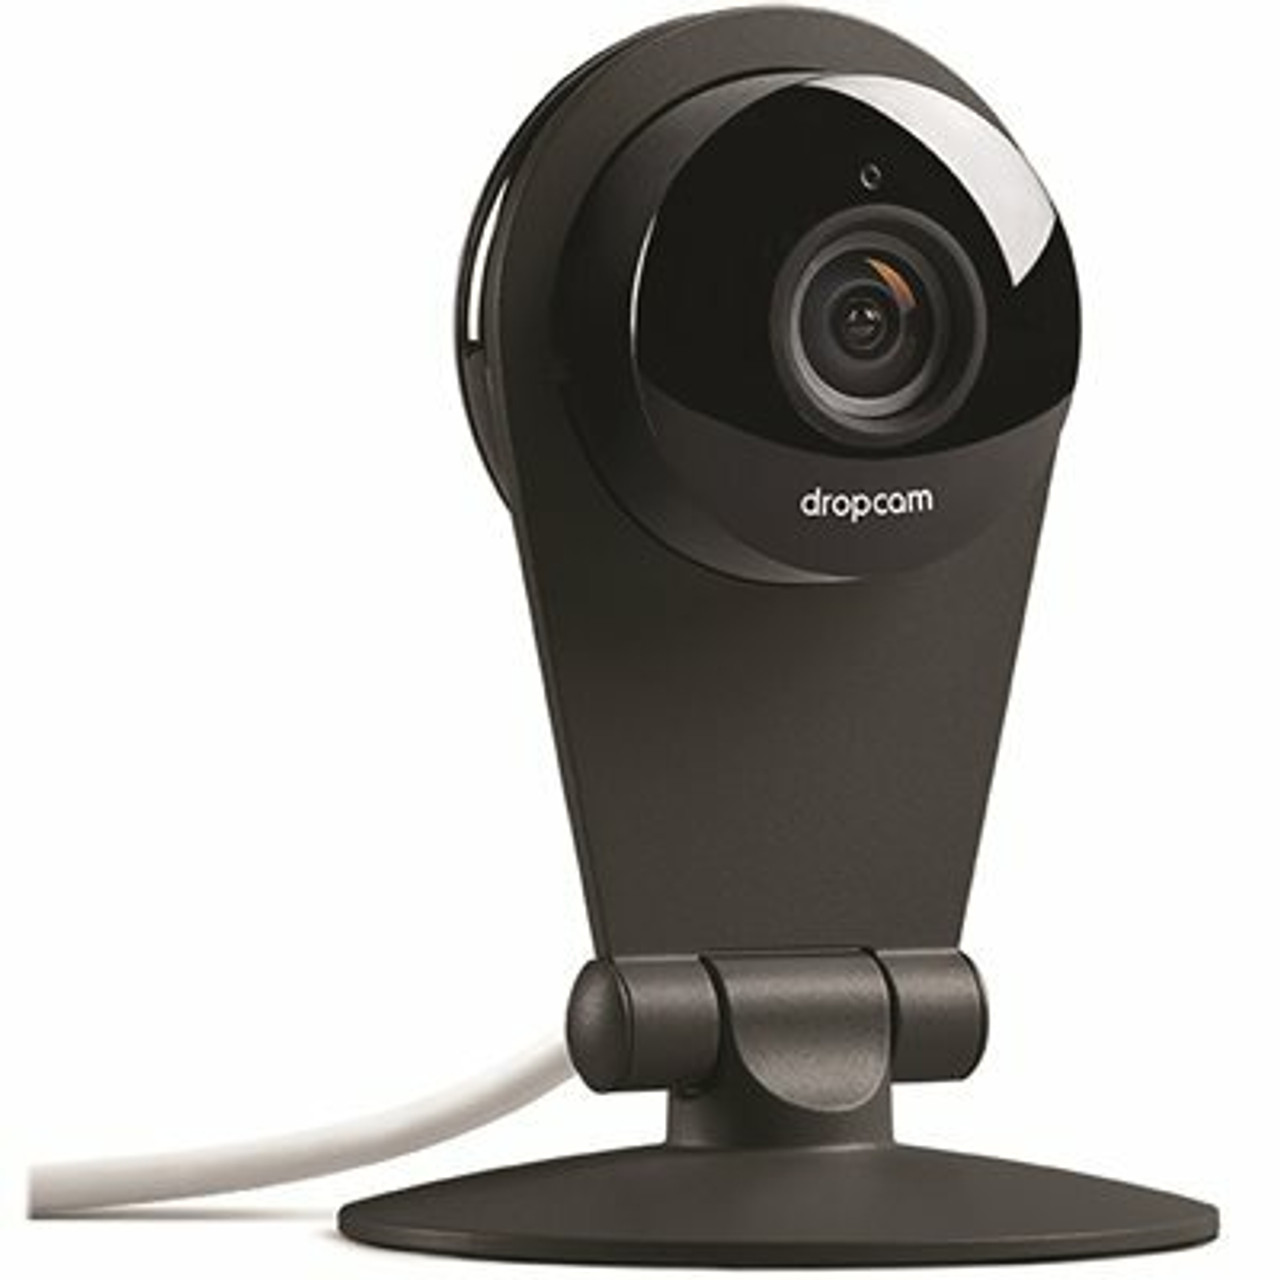 Nest Dropcam Pro Wireless High-Definition Security Camera